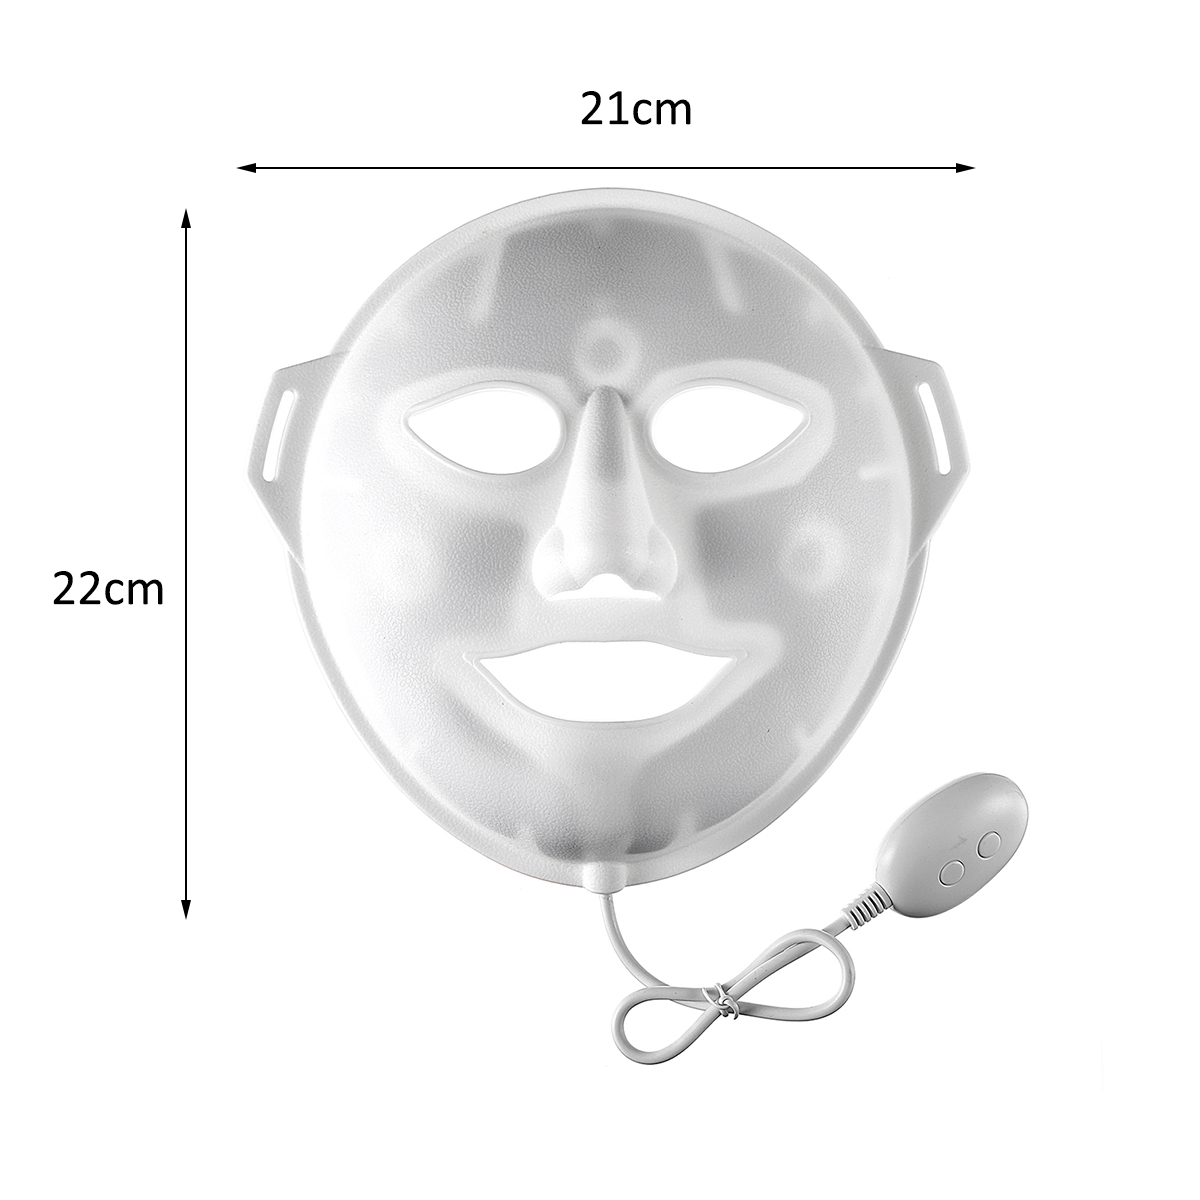 LED-Photon-Therapy-Facial-Mask-3-Colors-Vibration-Skin-Massager-Beauty-Face-Tool-1940393-7